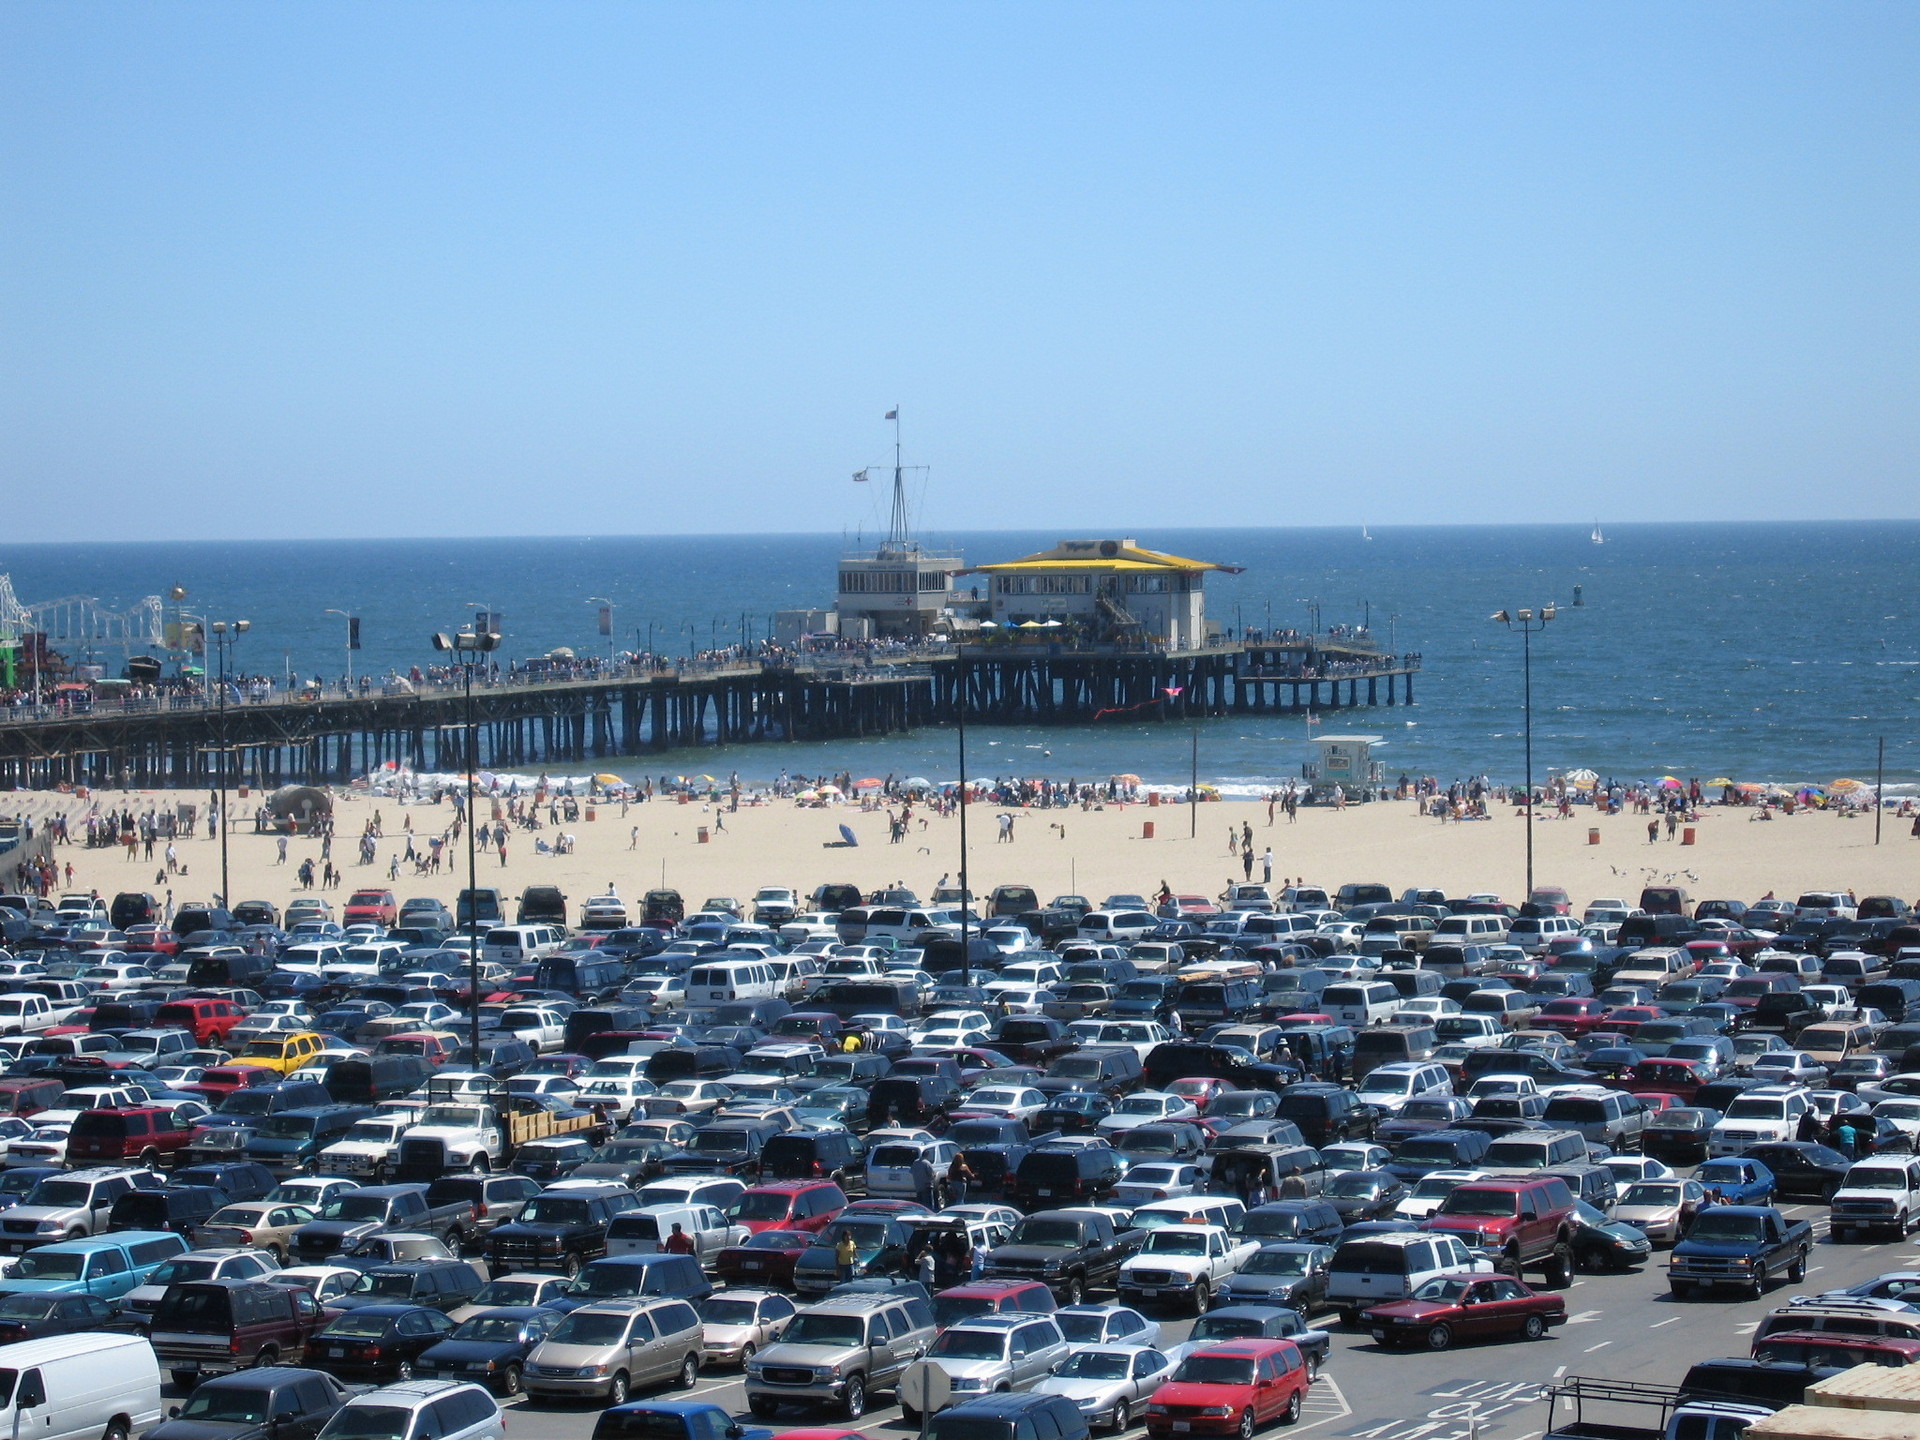 1920x1440 Los Angeles images Santa Monica Beach HD wallpaper and background photos